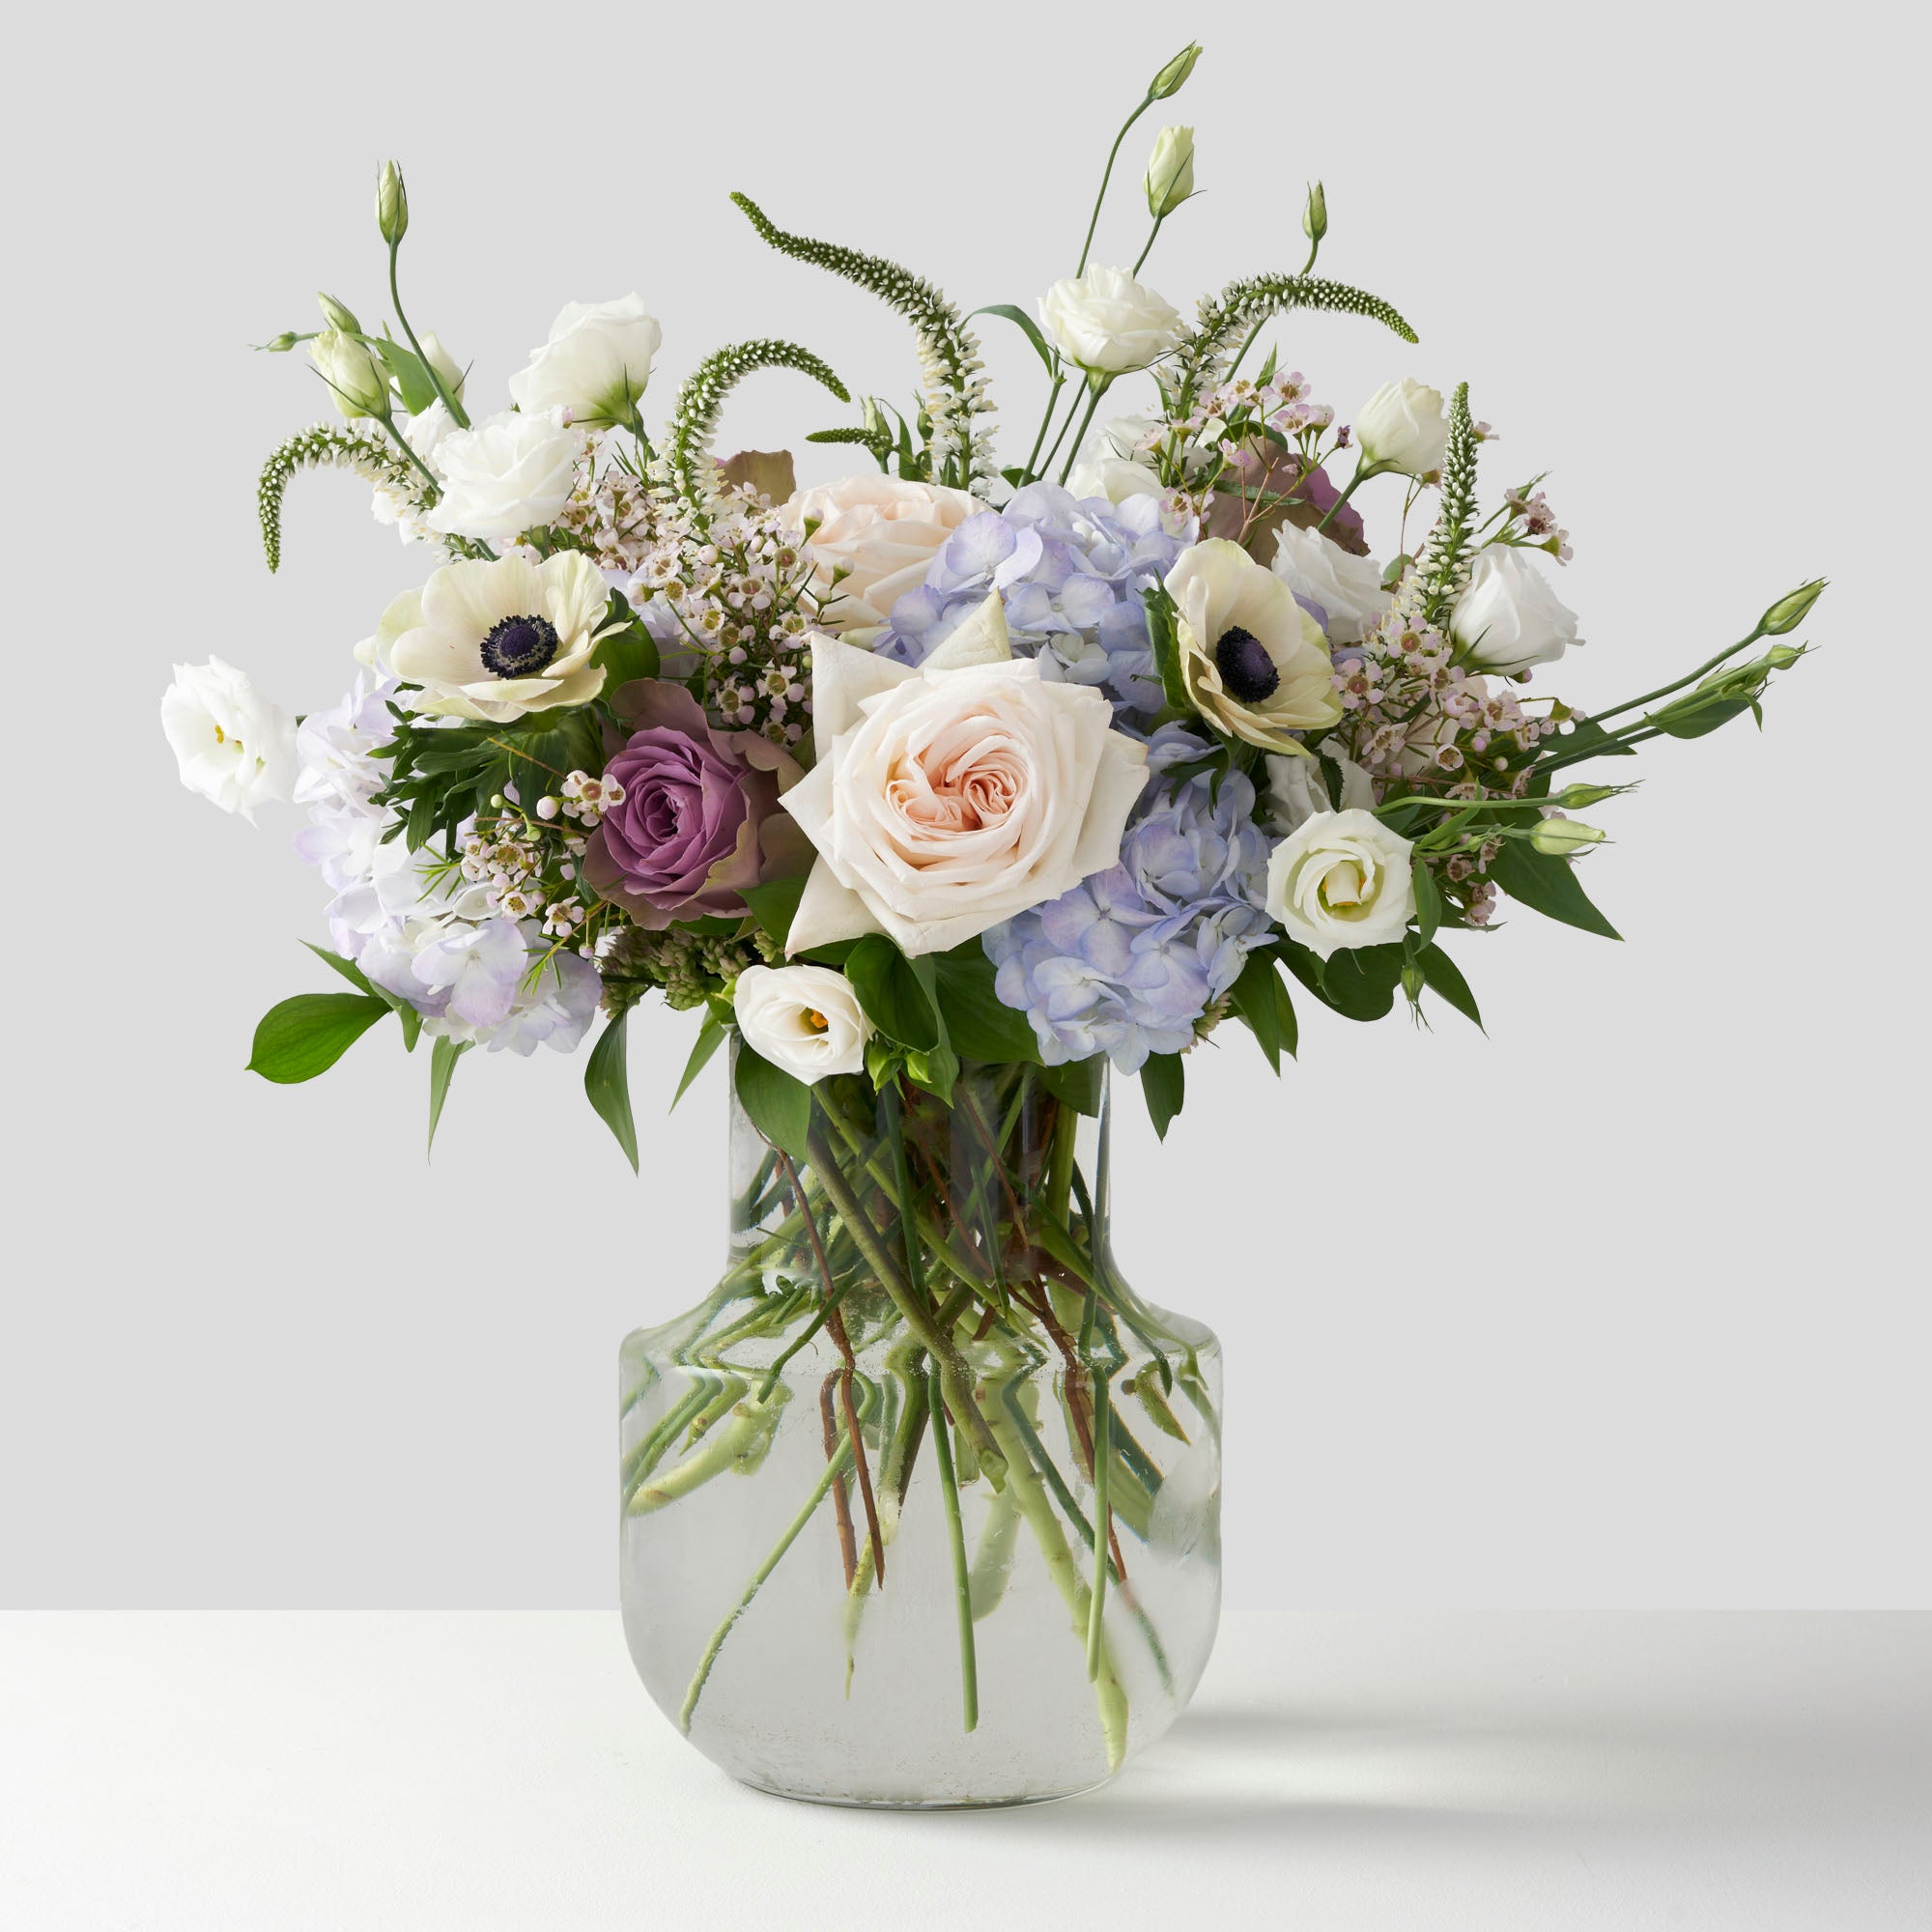 Clear glass vase containing lavender roses, blue hydrangea, white anemonies, white veronica, and white lisianthus in a loose airy style, on white background.